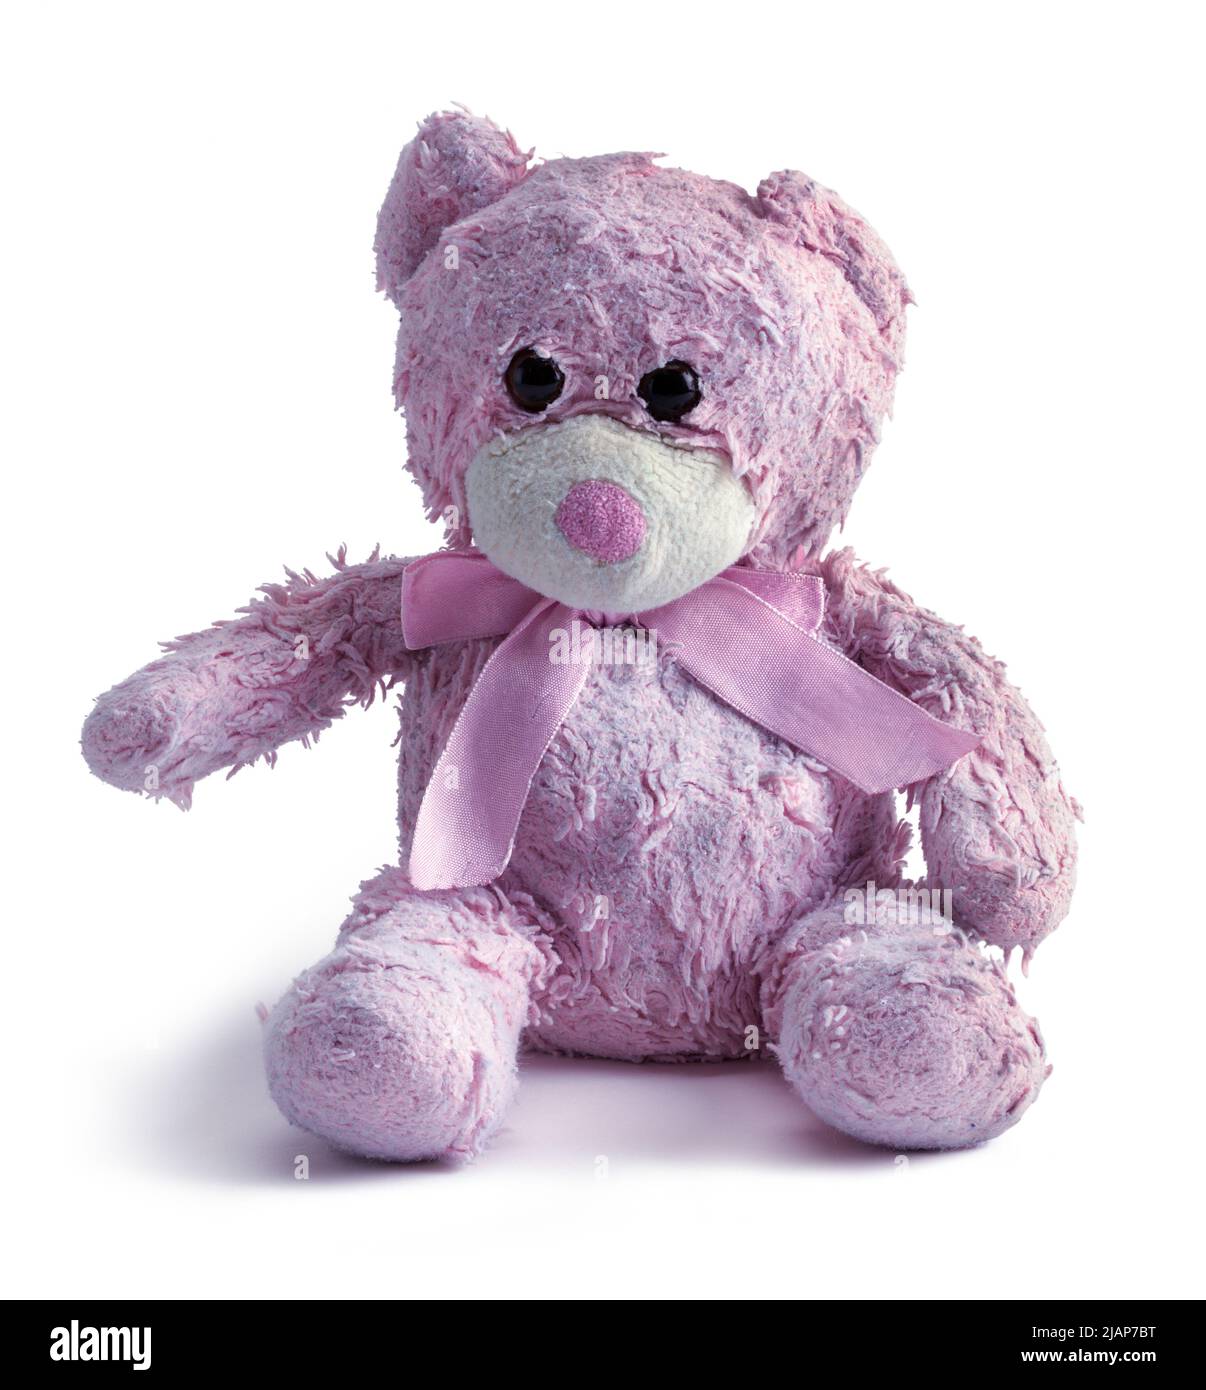 Old Pink Teddy Bear Cut Out on White. Banque D'Images